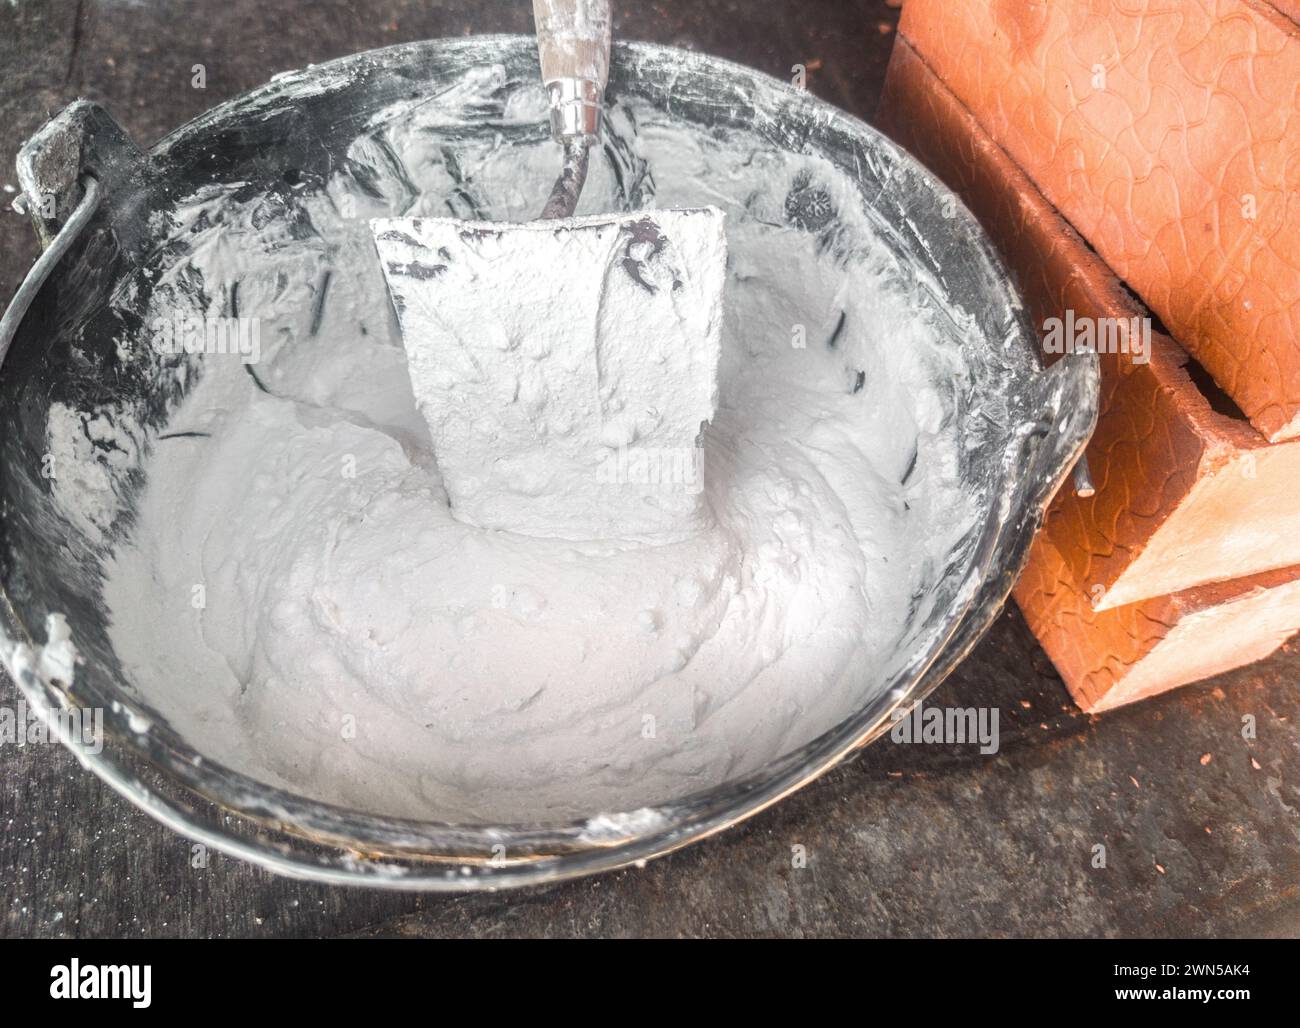 Bucket full white adhesive mortar ready for applicate. Bricks as background Stock Photo